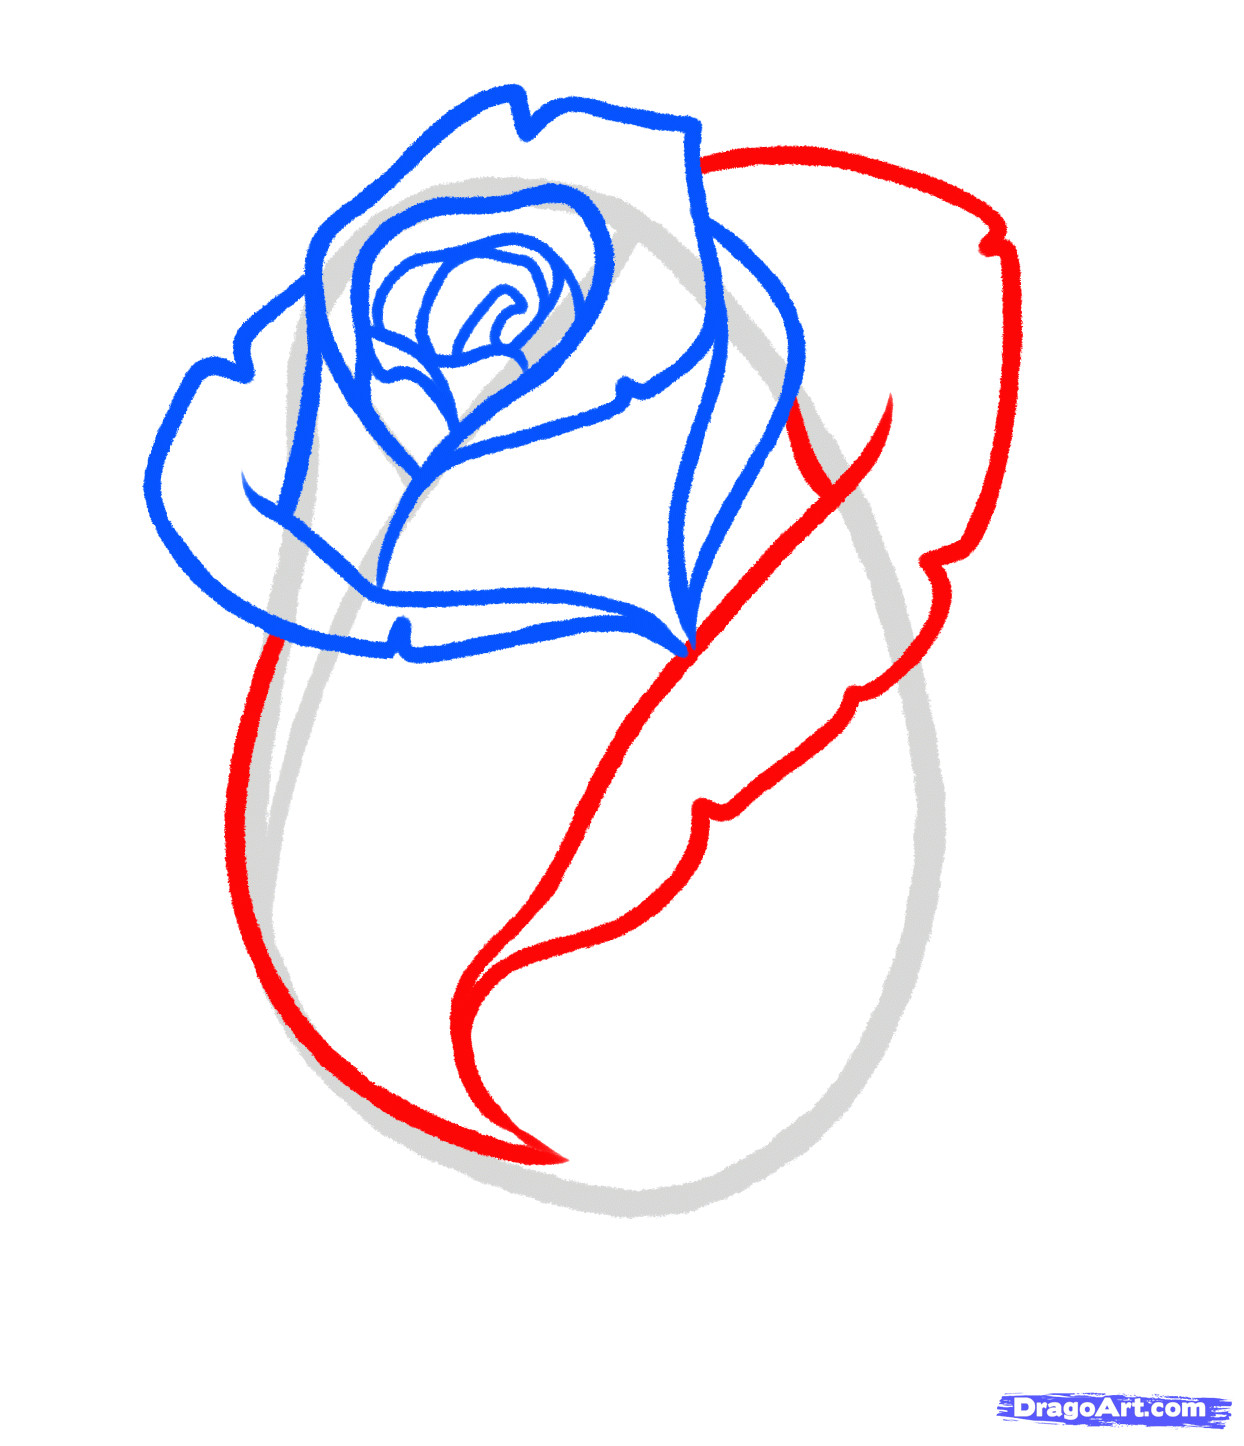 5 Drawing Techniques How to Draw A Rose Bud Rose Bud Step 5 Sketching Flowers